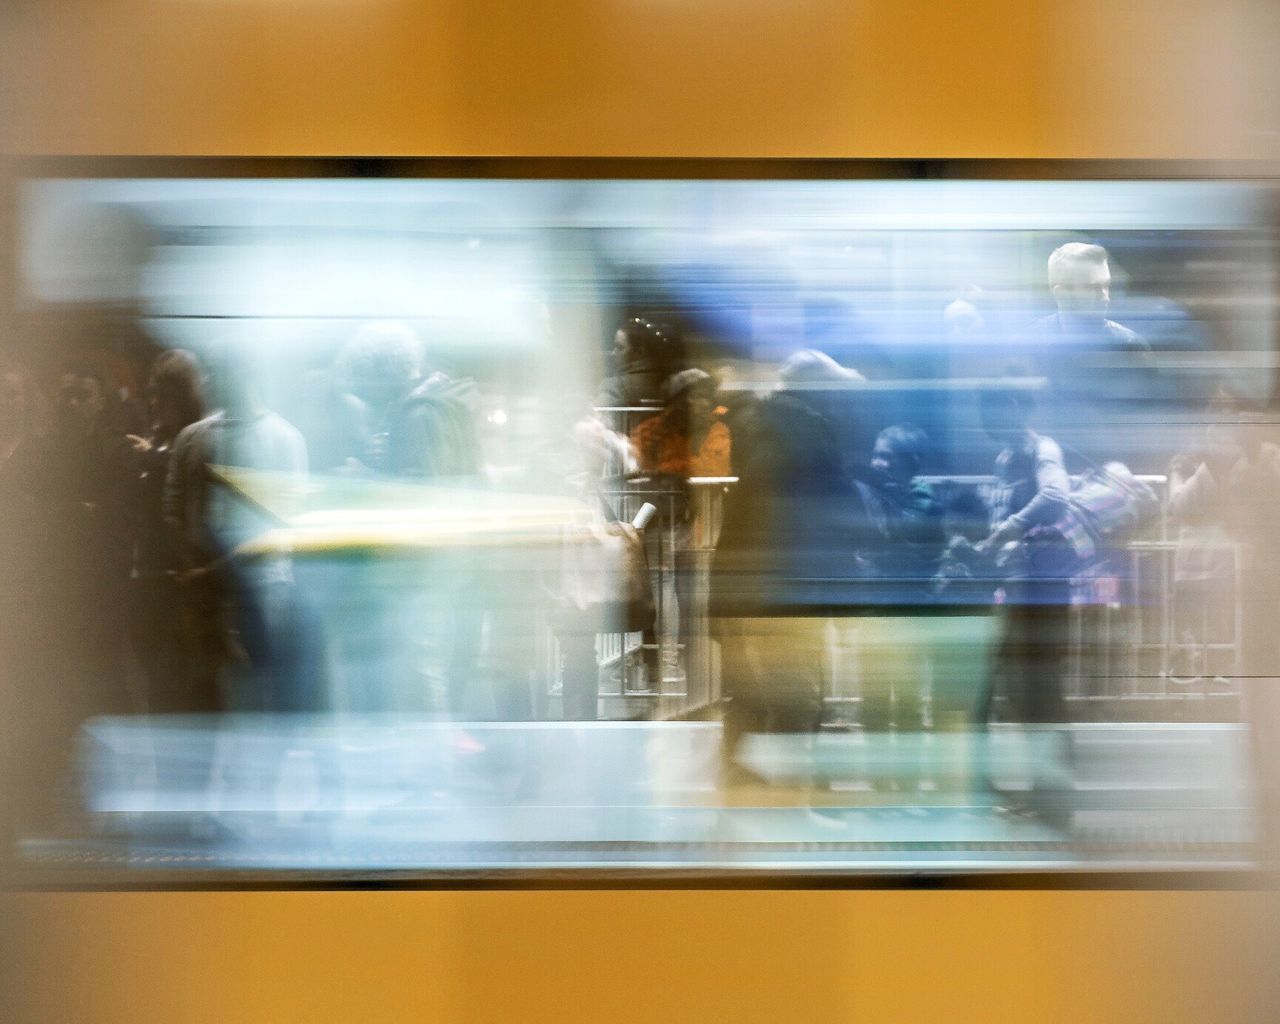 blurred motion, motion, speed, men, real people, lifestyles, large group of people, group of people, transportation, walking, women, train - vehicle, long exposure, indoors, public transportation, urgency, crowd, city, day, people, adult